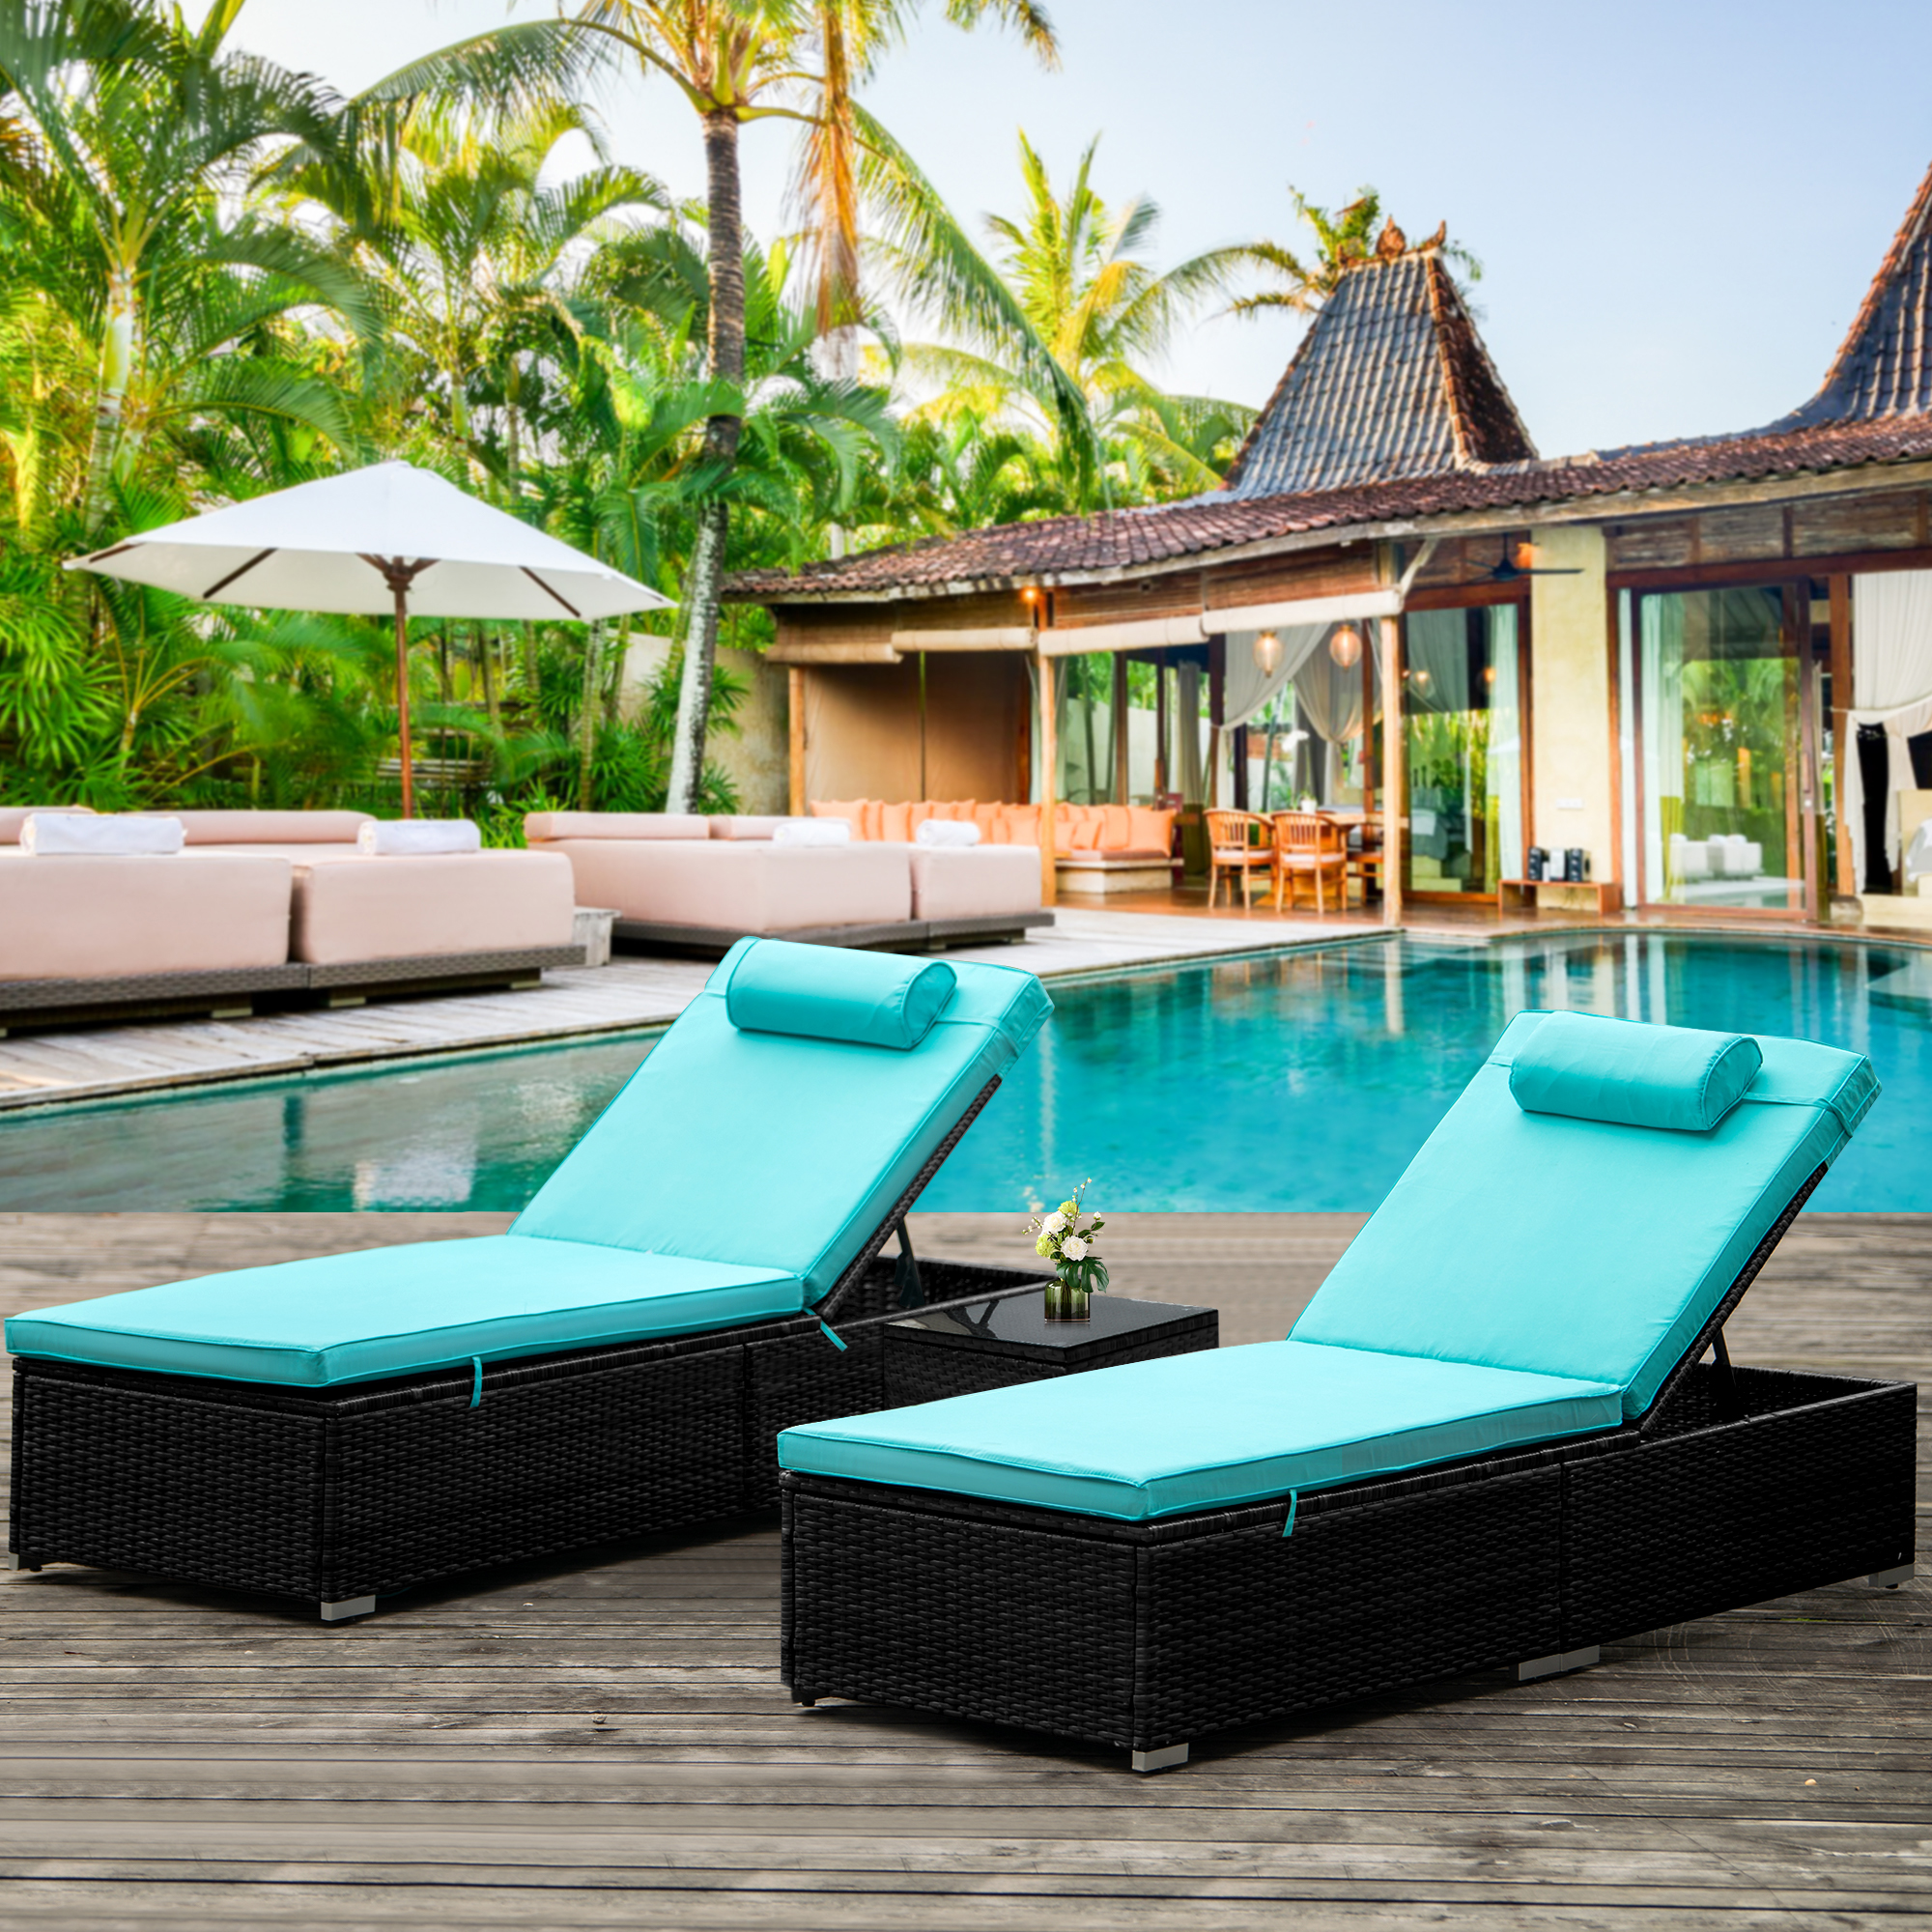 uhomepro 3-Piece Outdoor Patio Furniture Set Chaise Lounge, Patio Reclining Rattan Lounge Chair Chaise Couch Cushioned with Glass Coffee Table, Adjustable Back and Feet, Lounger Chair for Pool Garden - image 1 of 12